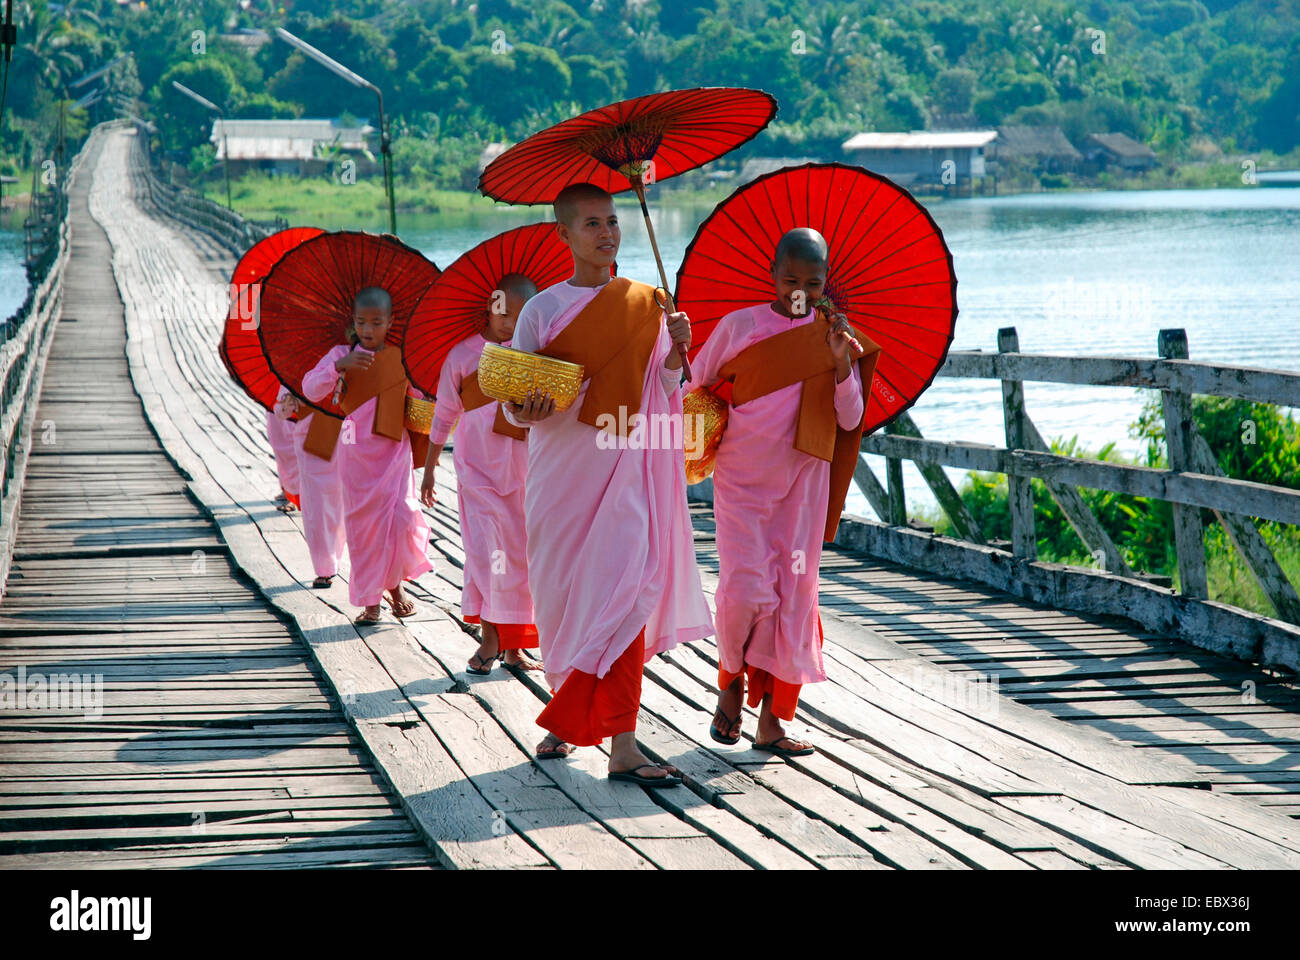 a group of nuns and convent pupils with sunshades on a wooden bridge, Thailand, Sanglaburi Stock Photo